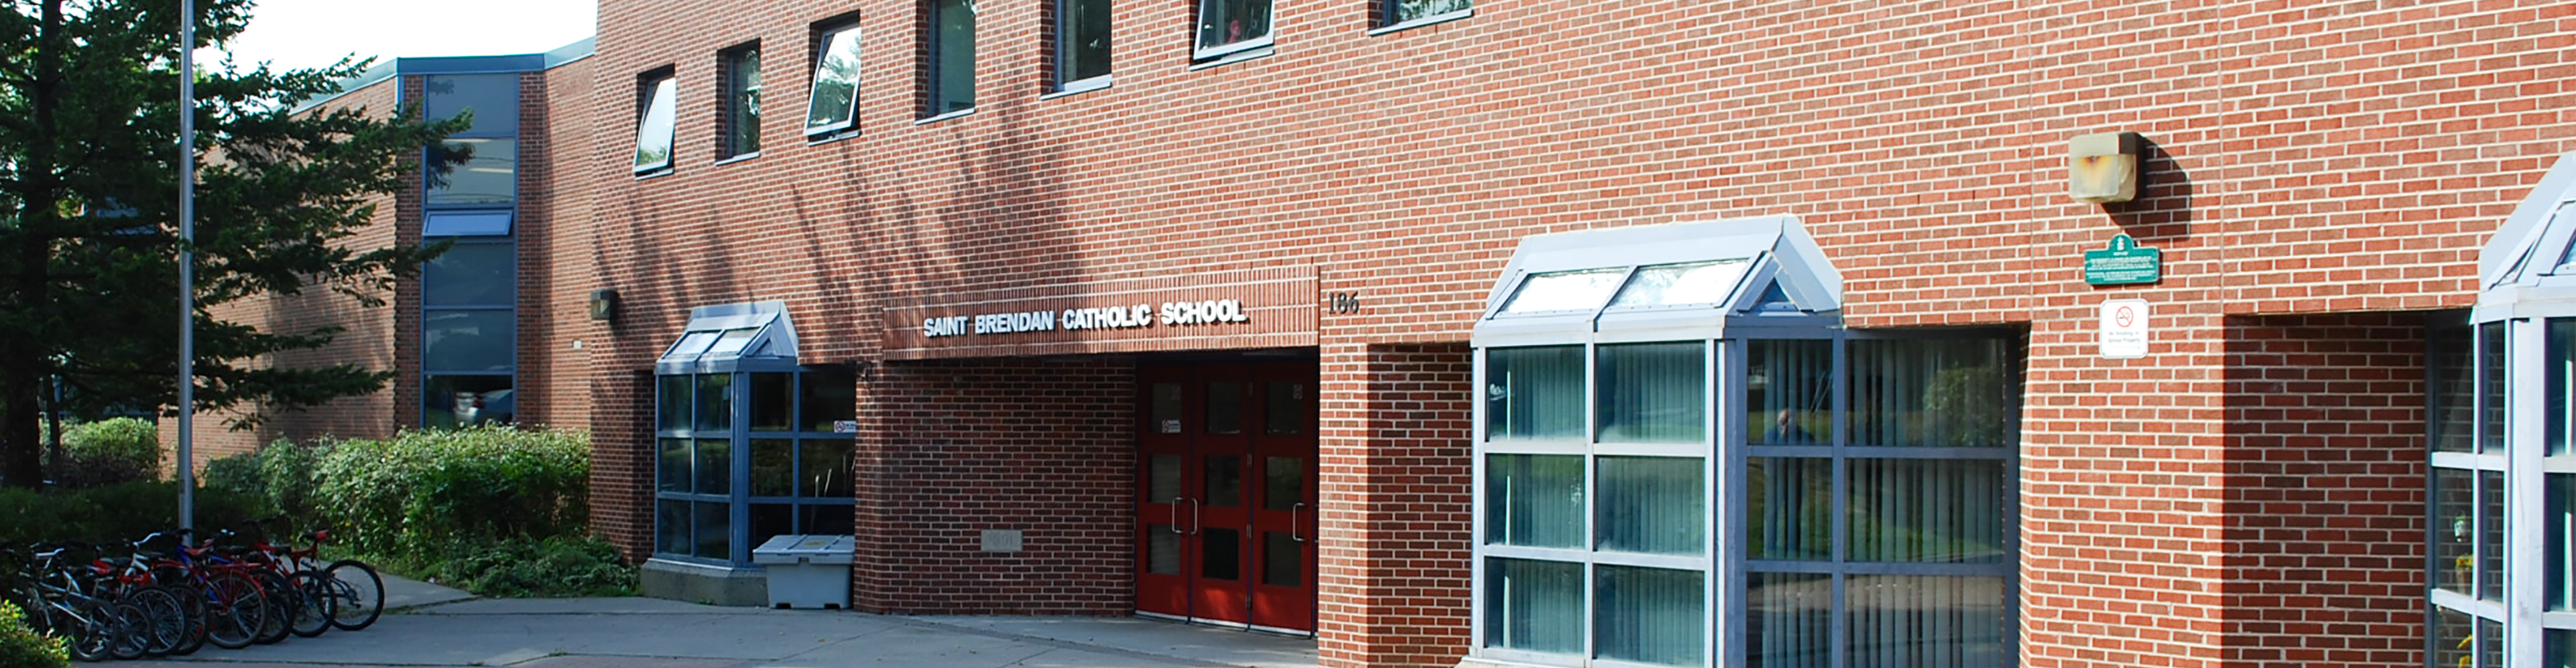 An image of the school building's front entrance.